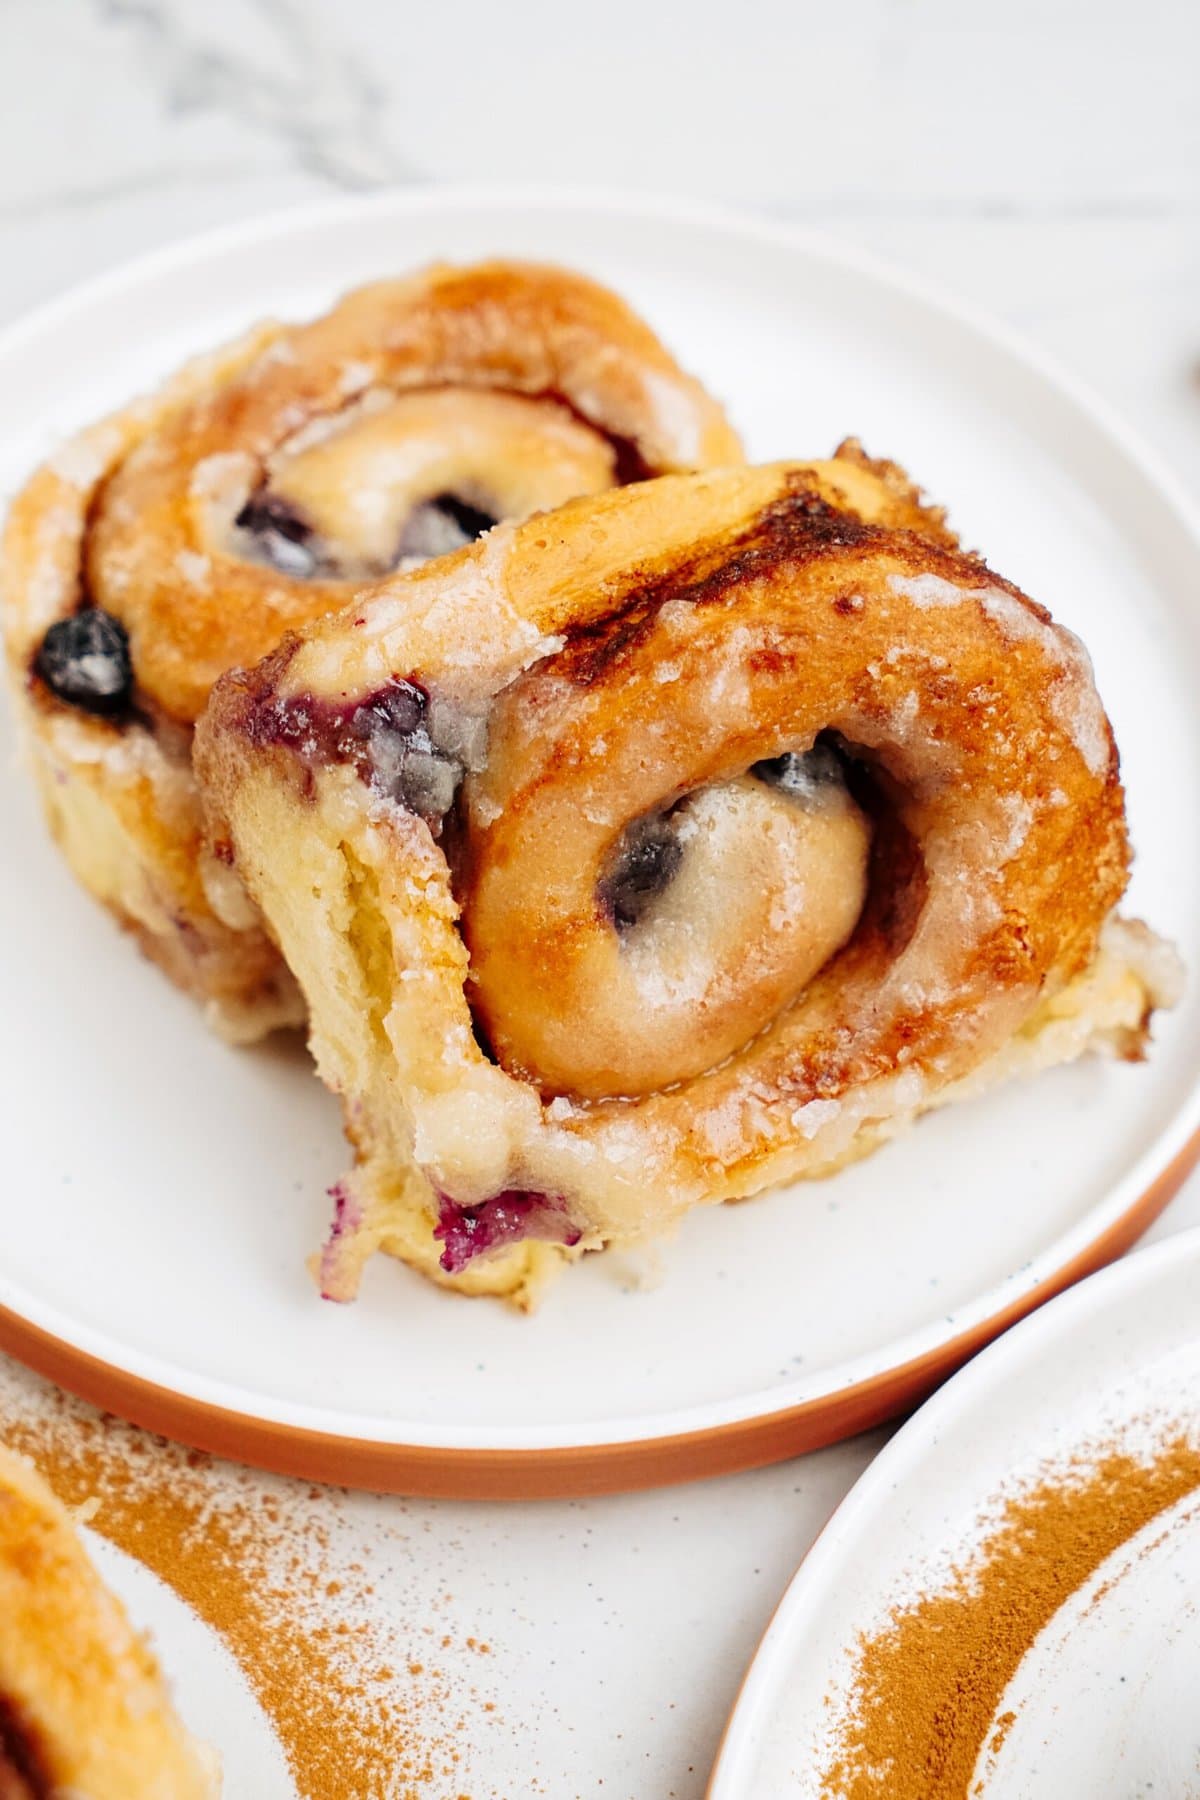 Close-up of two cinnamon rolls with a blueberry glaze on a white plate, with a light dusting of cinnamon on the plate's rim and a marble countertop in the background.